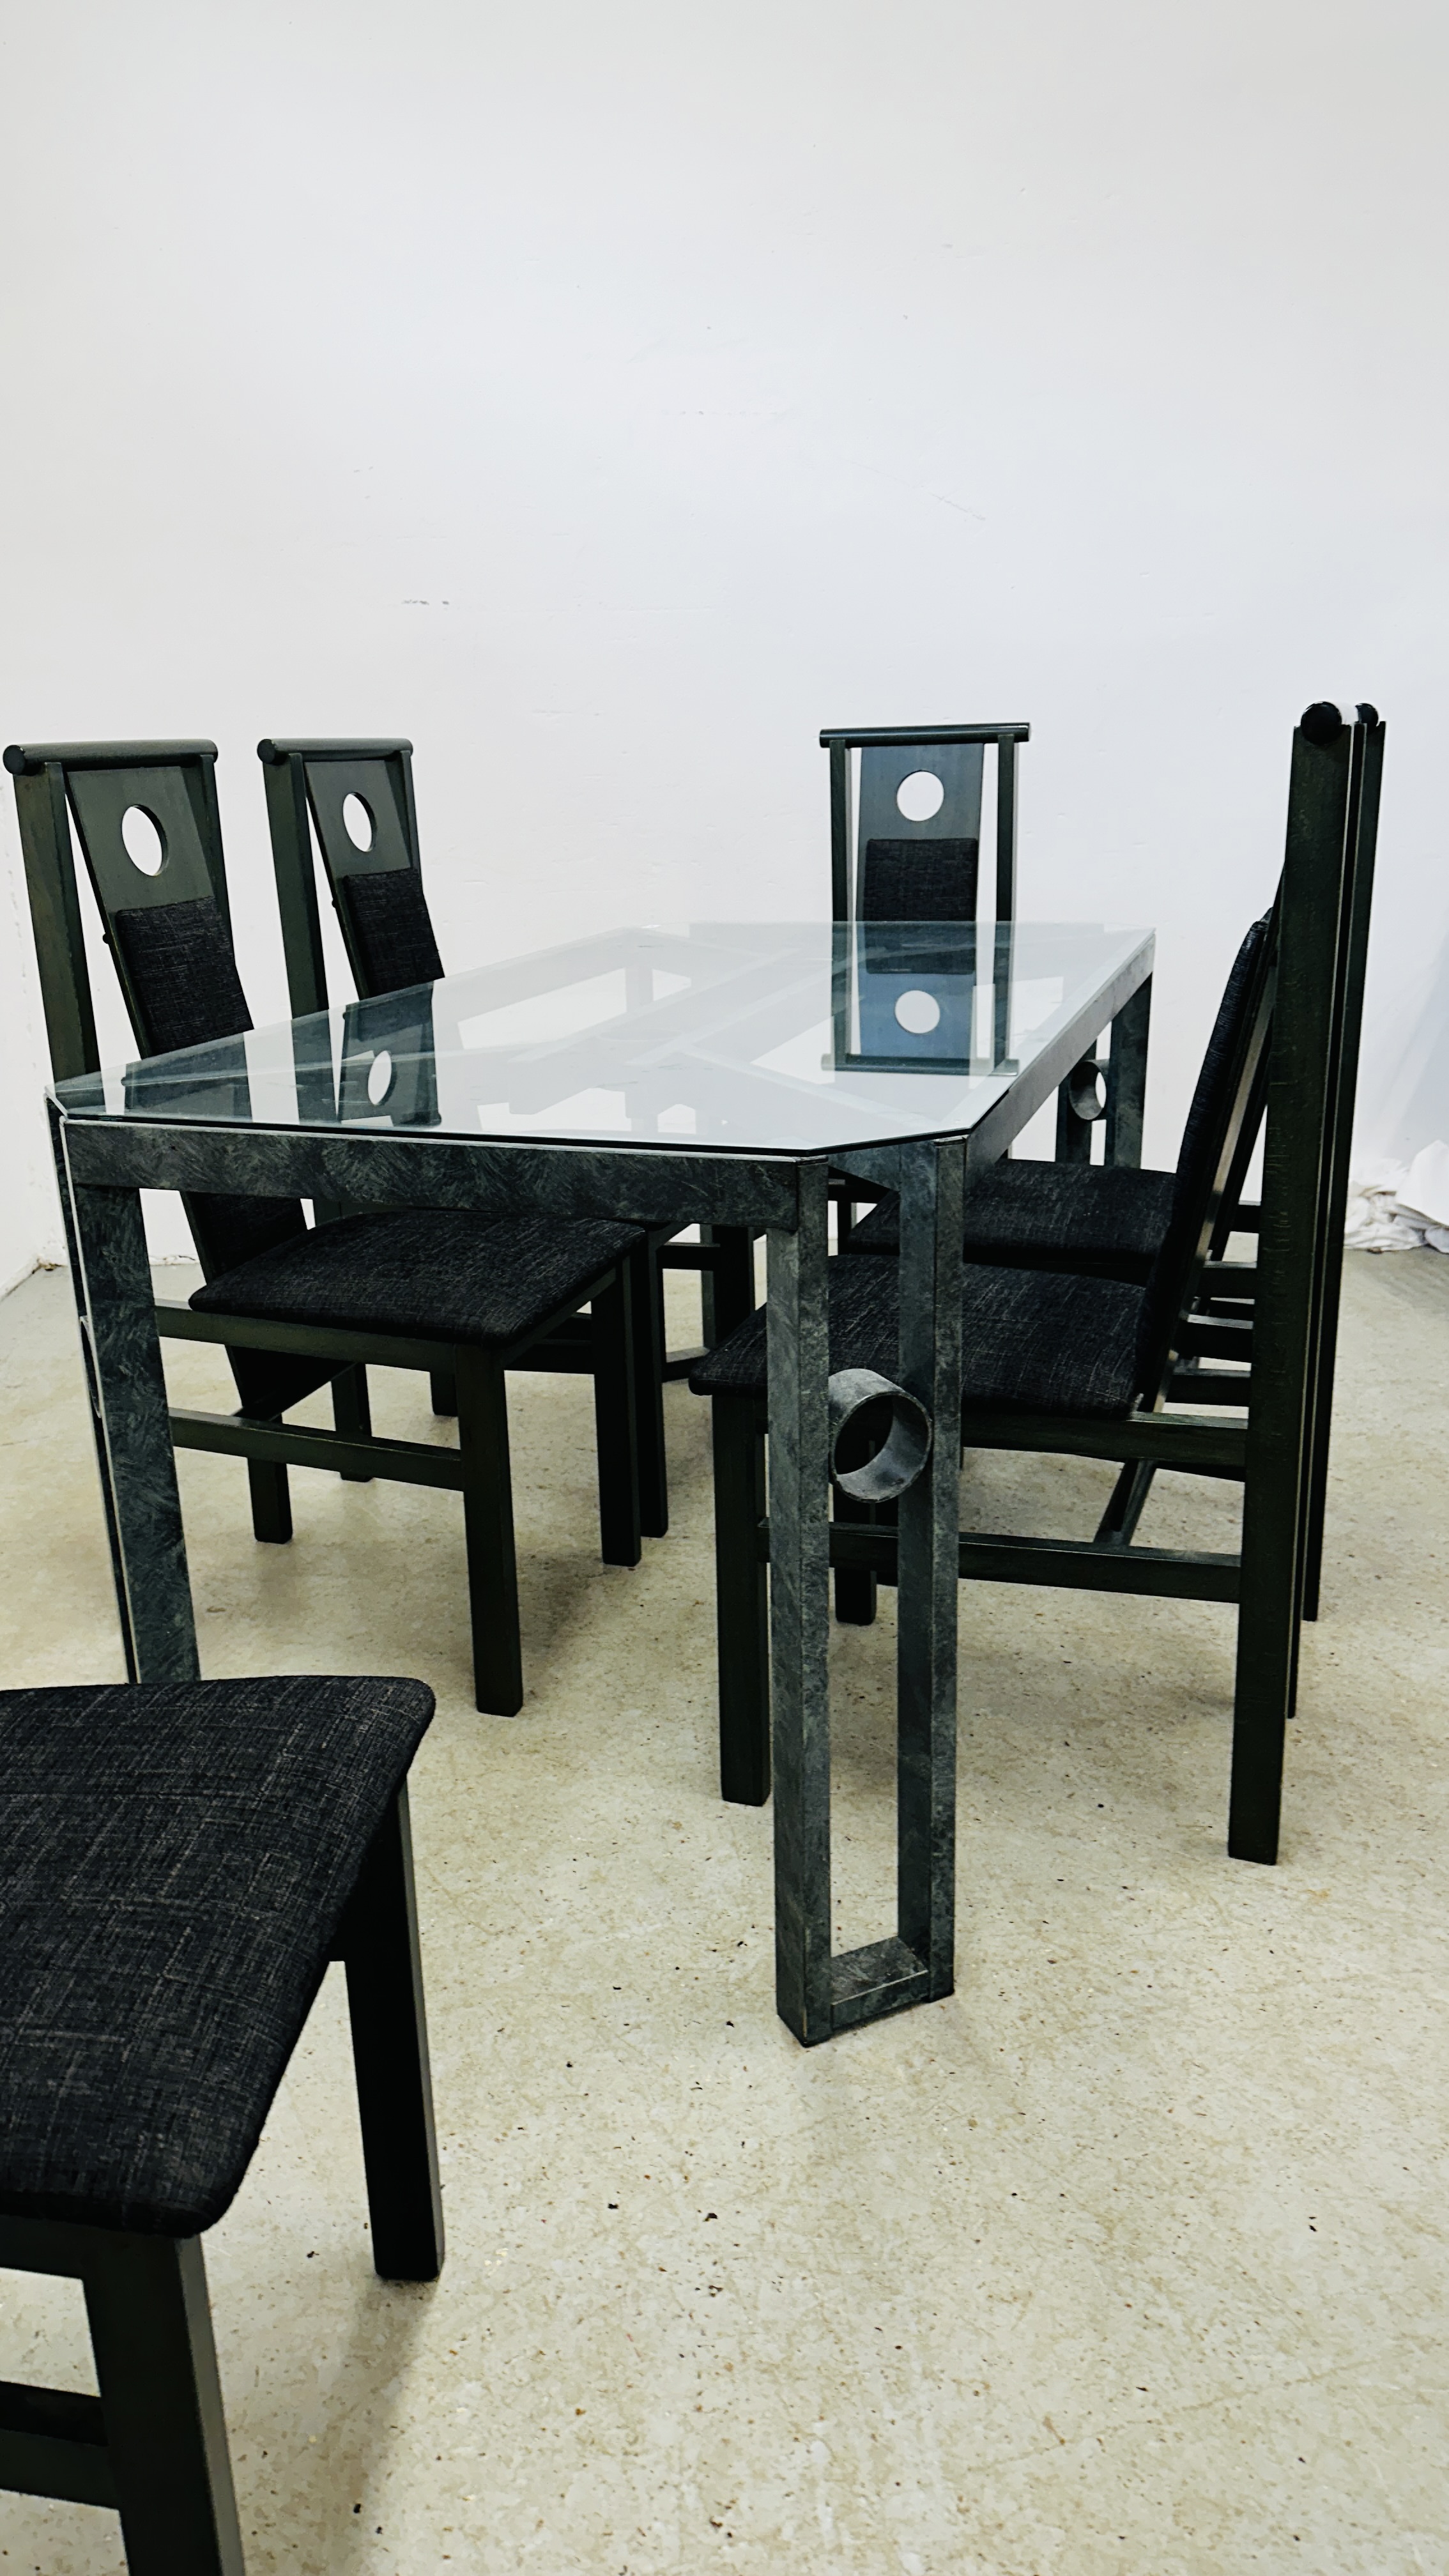 A DESIGNER MODERN METAL CRAFT DINING TABLE WITH GLASS TOP 155CM X 80CM ACCOMPANIED BY A SET OF SIX - Image 11 of 14